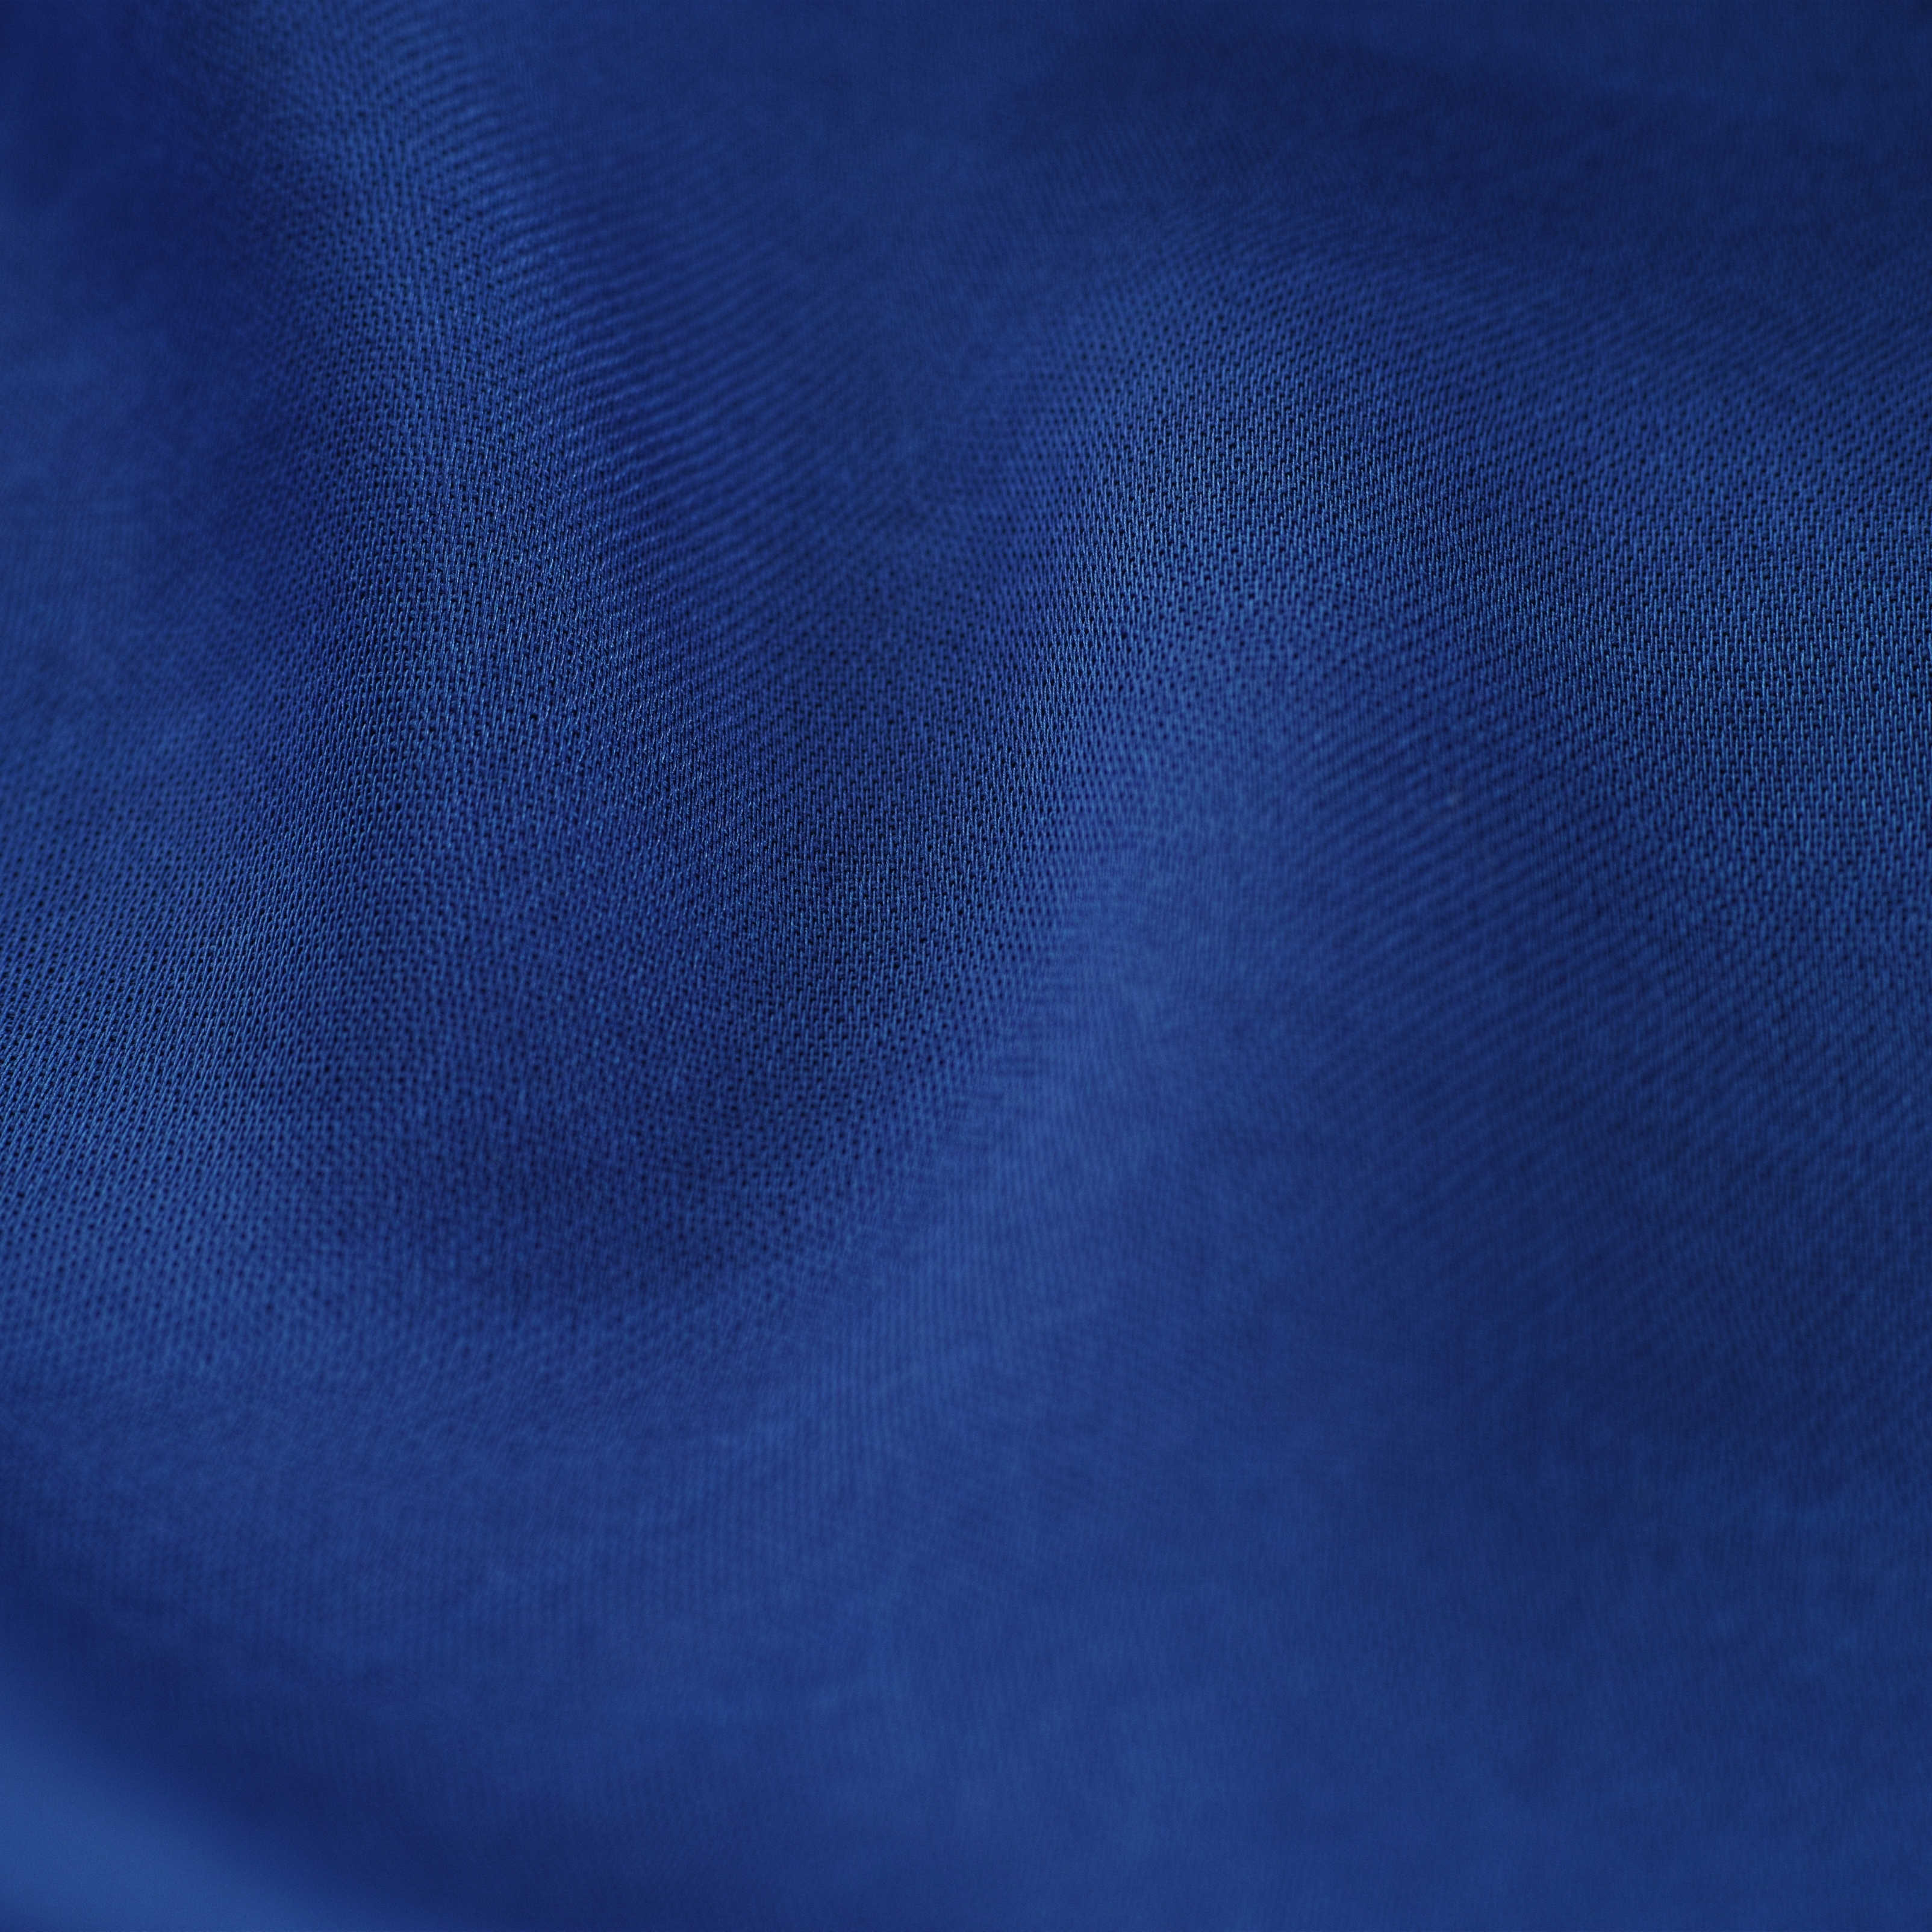 iPad Wallpapers Blue Smooth Fabric Texture iPad Wallpaper 3208x3208 px